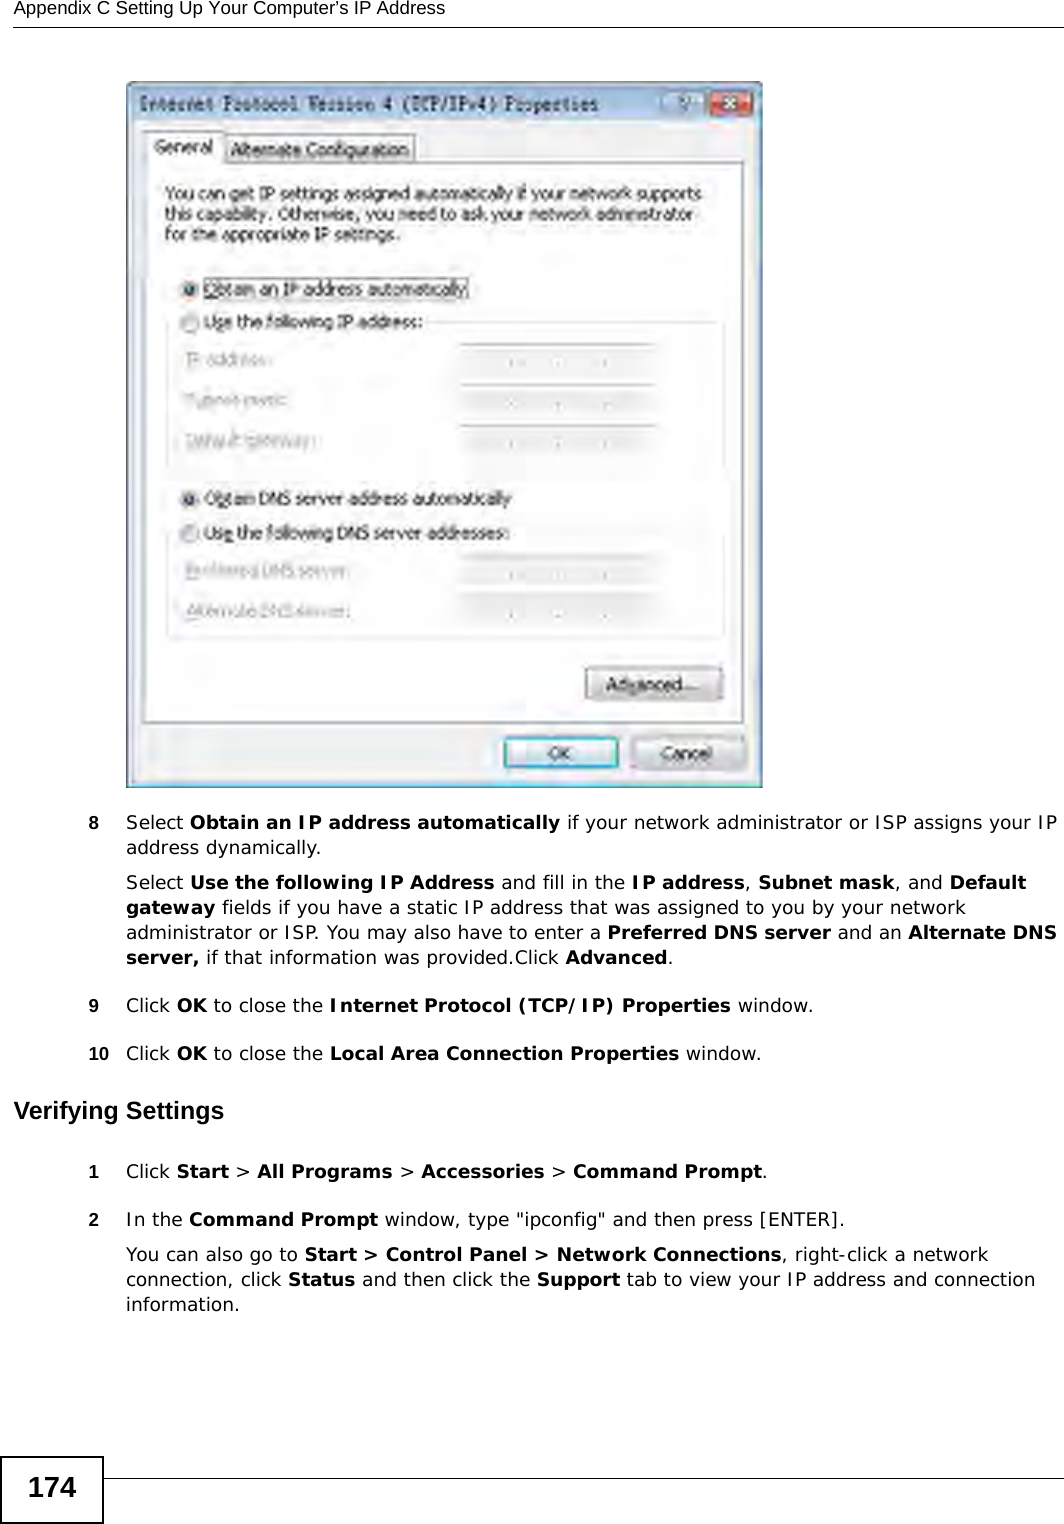 Appendix C Setting Up Your Computer’s IP Address1748Select Obtain an IP address automatically if your network administrator or ISP assigns your IP address dynamically.Select Use the following IP Address and fill in the IP address, Subnet mask, and Default gateway fields if you have a static IP address that was assigned to you by your network administrator or ISP. You may also have to enter a Preferred DNS server and an Alternate DNS server, if that information was provided.Click Advanced.9Click OK to close the Internet Protocol (TCP/IP) Properties window.10 Click OK to close the Local Area Connection Properties window.Verifying Settings1Click Start &gt; All Programs &gt; Accessories &gt; Command Prompt.2In the Command Prompt window, type &quot;ipconfig&quot; and then press [ENTER]. You can also go to Start &gt; Control Panel &gt; Network Connections, right-click a network connection, click Status and then click the Support tab to view your IP address and connection information.